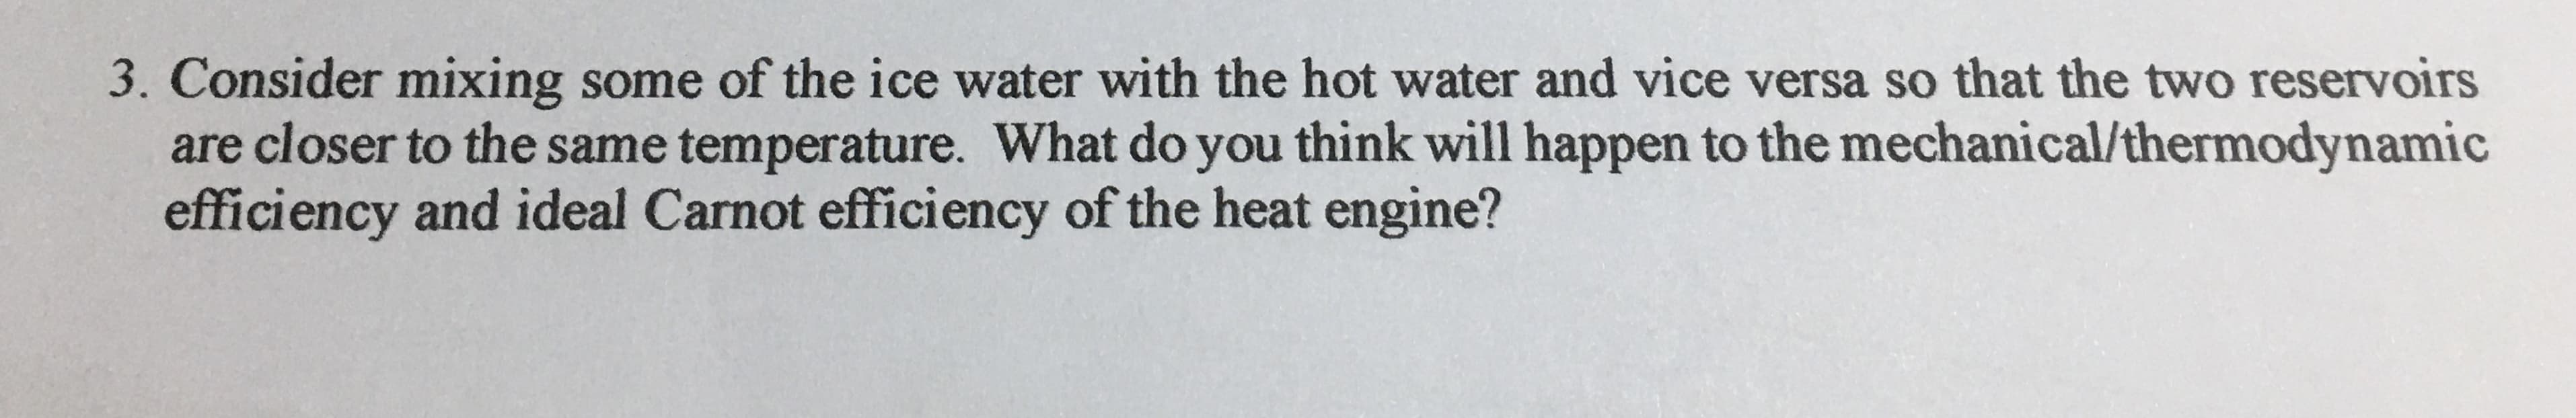 Consider mixing some of the ice water with the hot water and vice versa so that the two reservoirs
are closer to the same temperature. What do you think will happen to the mechanical/thermodynamic
efficiency and ideal Carnot efficiency of the heat engine?
